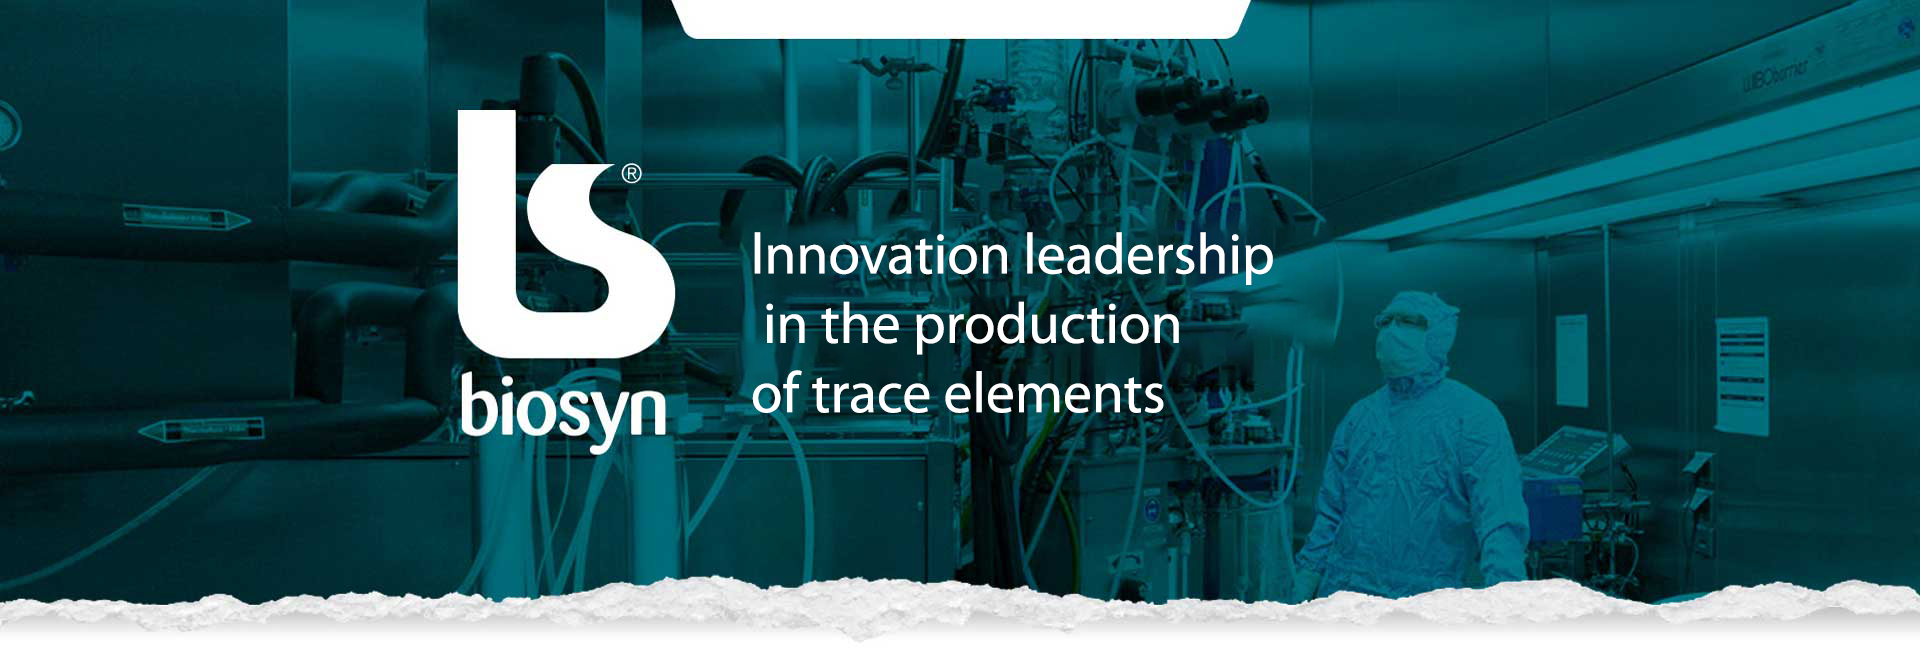 Innovation leadership in the production of trace elements.